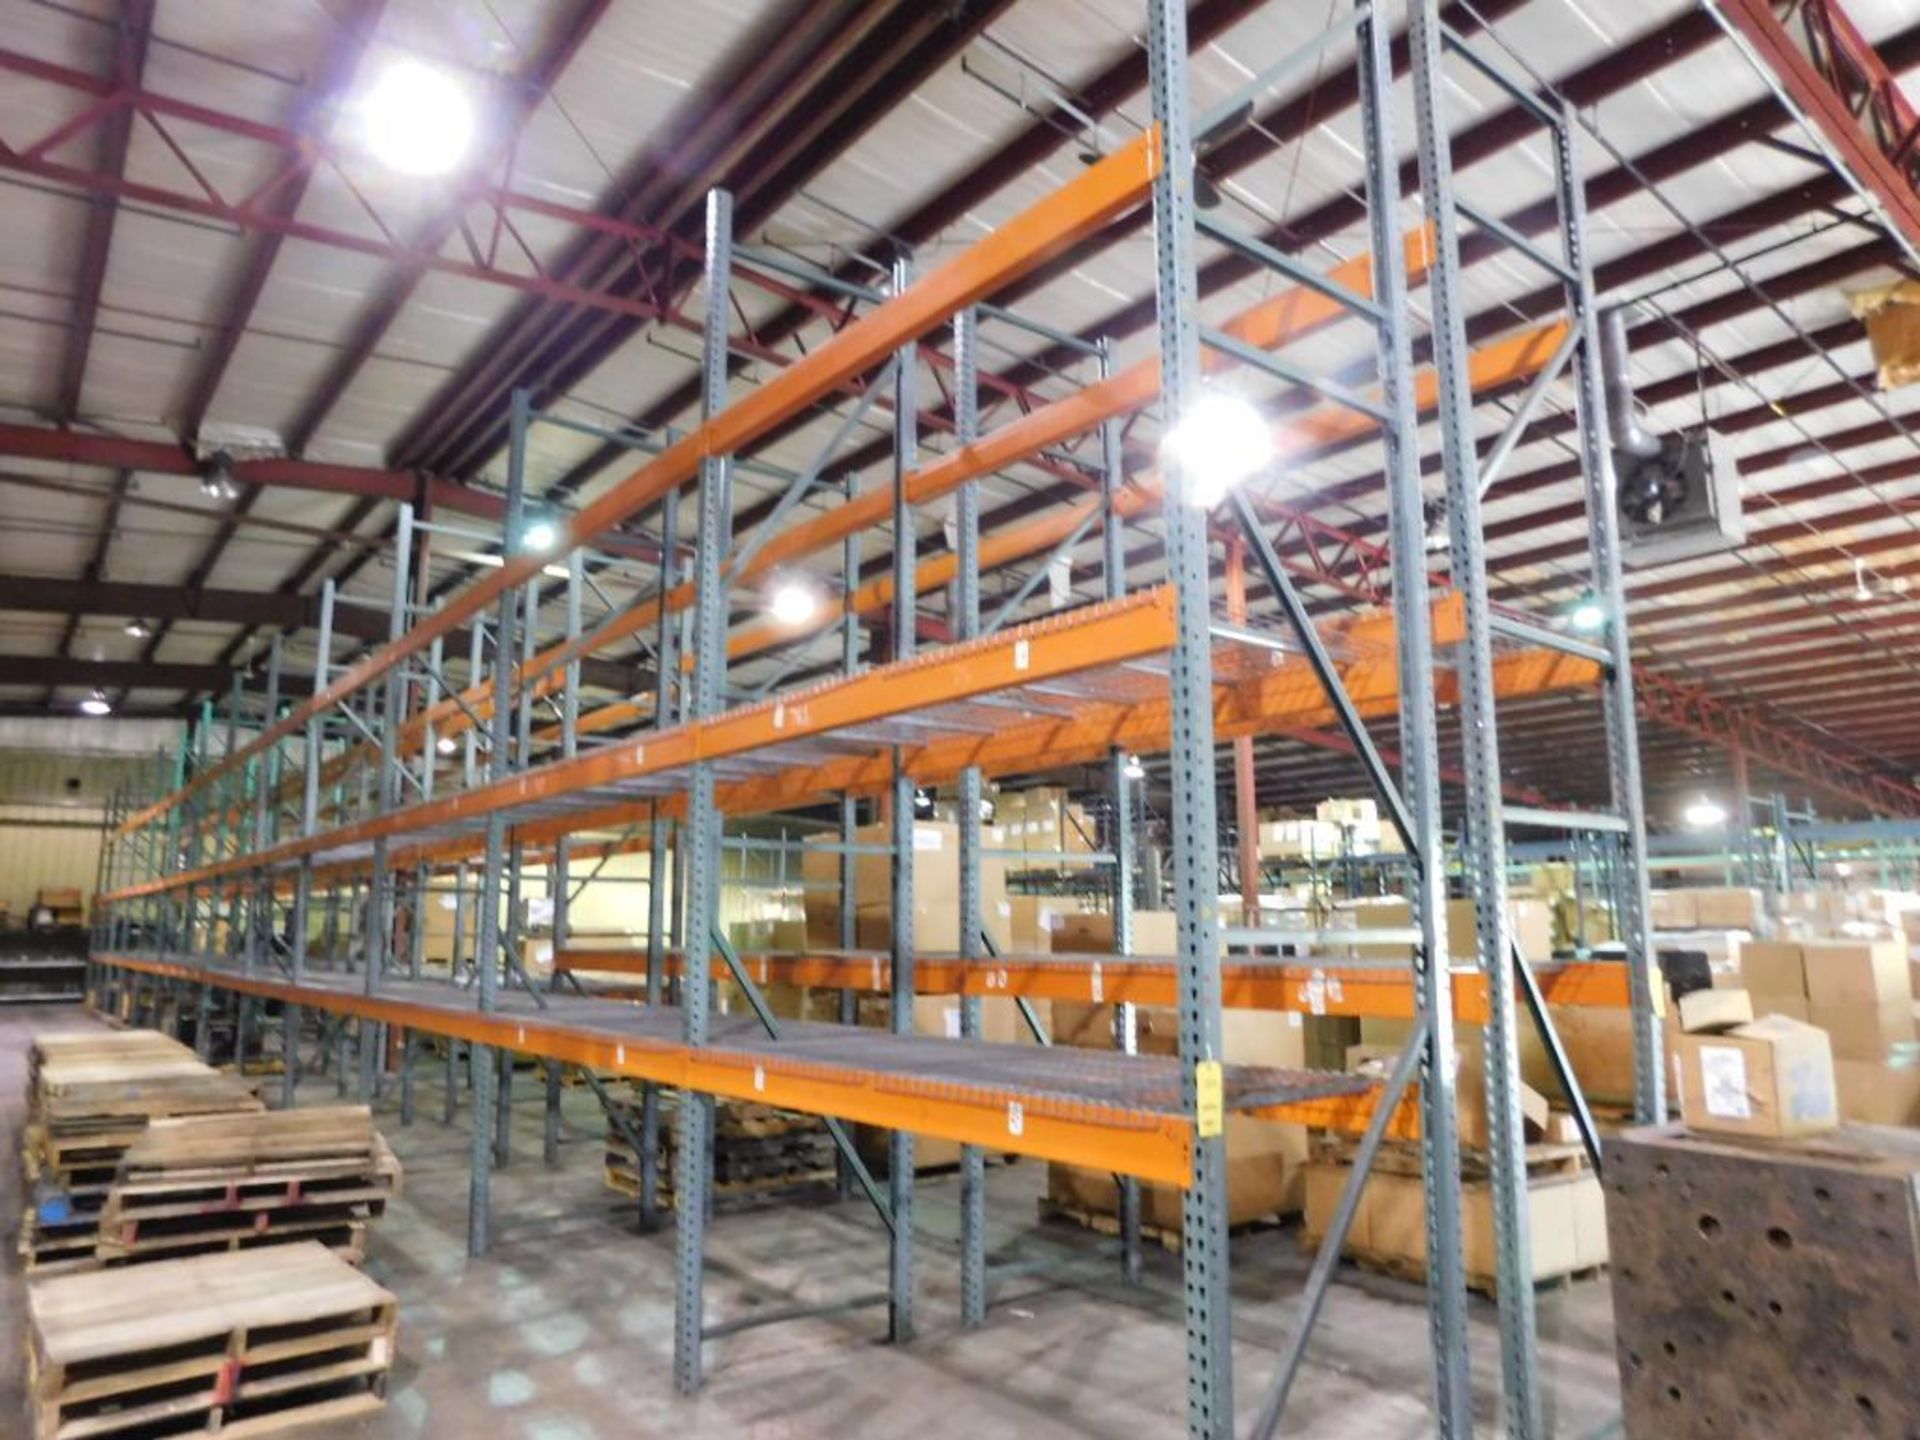 LOT: (26) Sections 16 ft. x 8 ft. x 42 in. 3-Tier Pallet Rack, No Decking (may be disassembled by